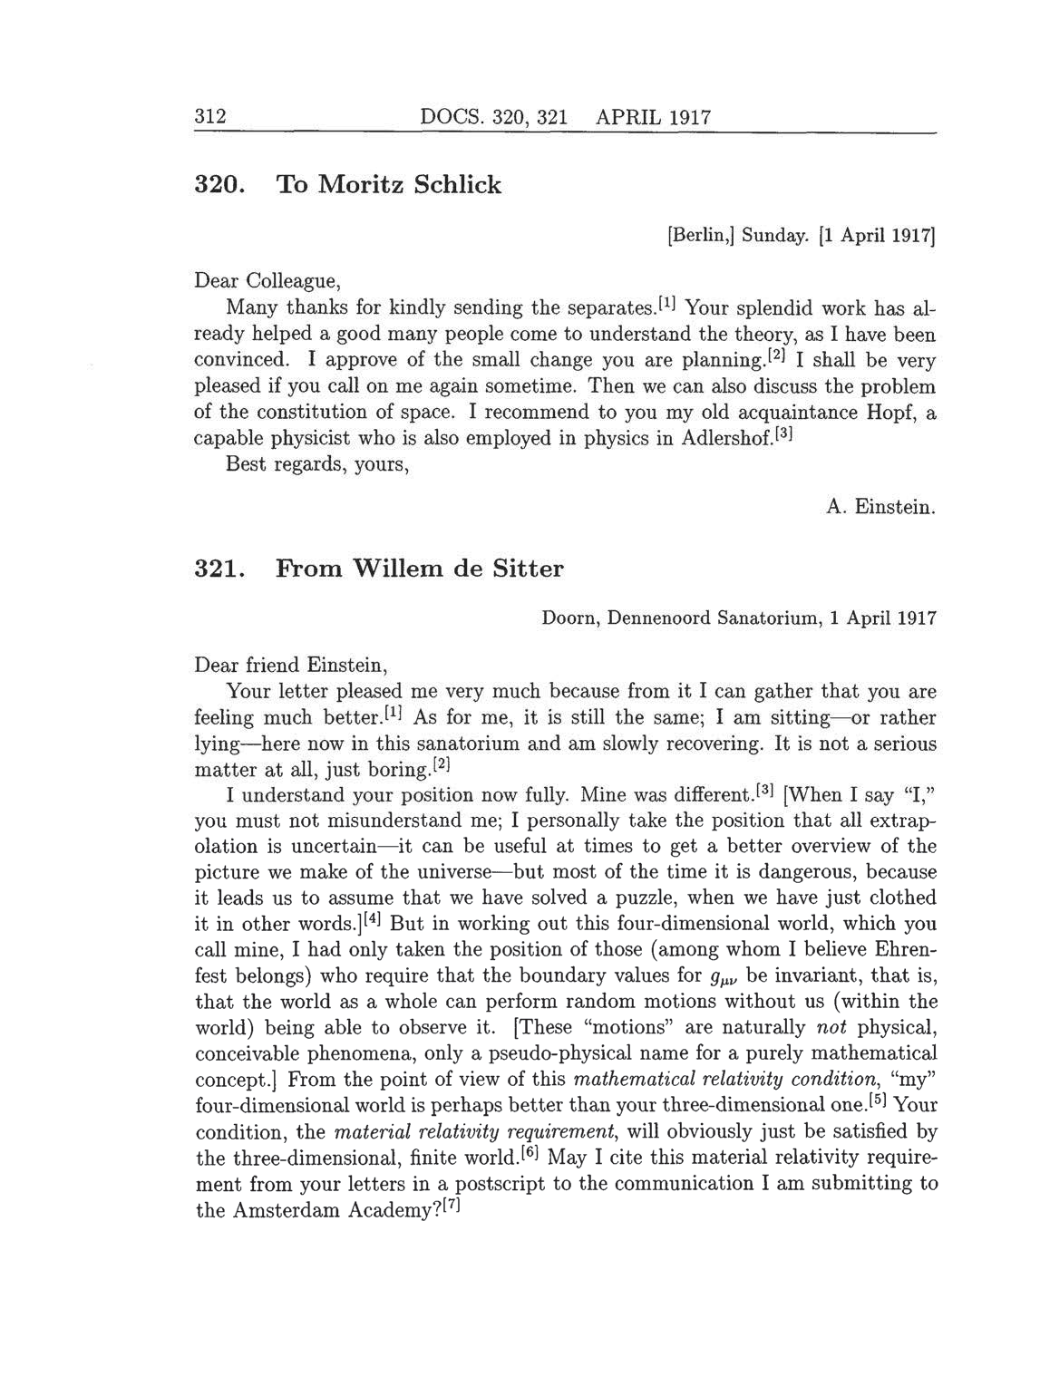 Volume 8: The Berlin Years: Correspondence, 1914-1918 (English translation supplement) page 312